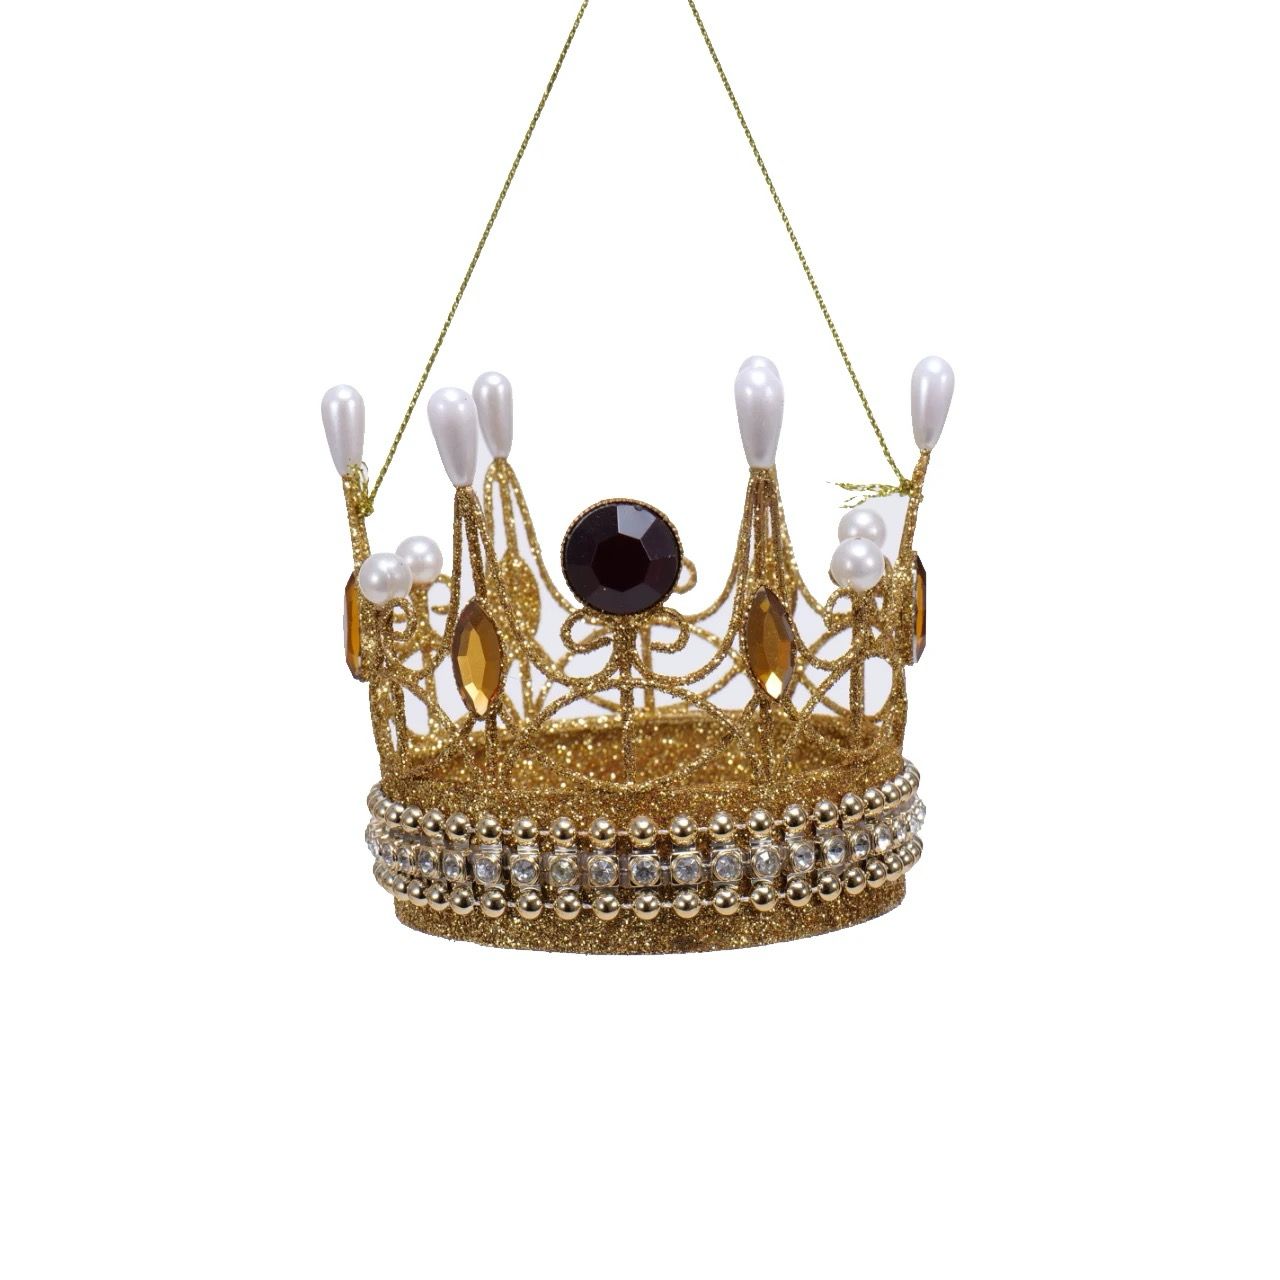 Gold Crown with pearls and Red Stone Ornament